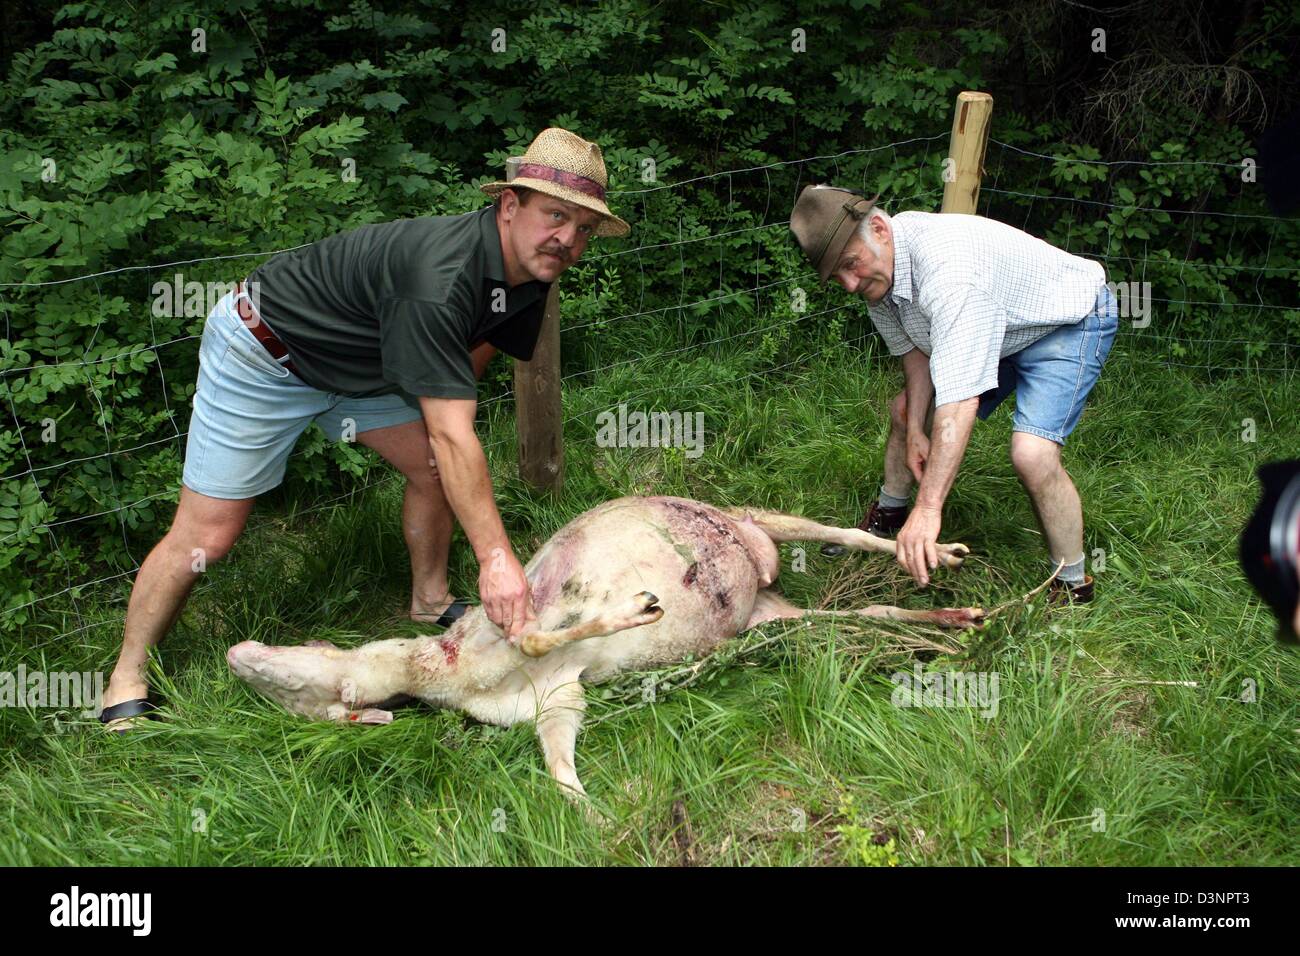 Simon Erlacher (R) and shepherd Bertl Baudrexel show the carcass of a killed sheep close to the Austrian border near Kreuth, Germany, Monday, 19 June 2006. According to official reports Bruno (officially known as 'JJ1'), the brown bear who has unnerved German and Austrian communities on both sides of the border since the middle of May, has killed two and injured several sheeps near Stock Photo